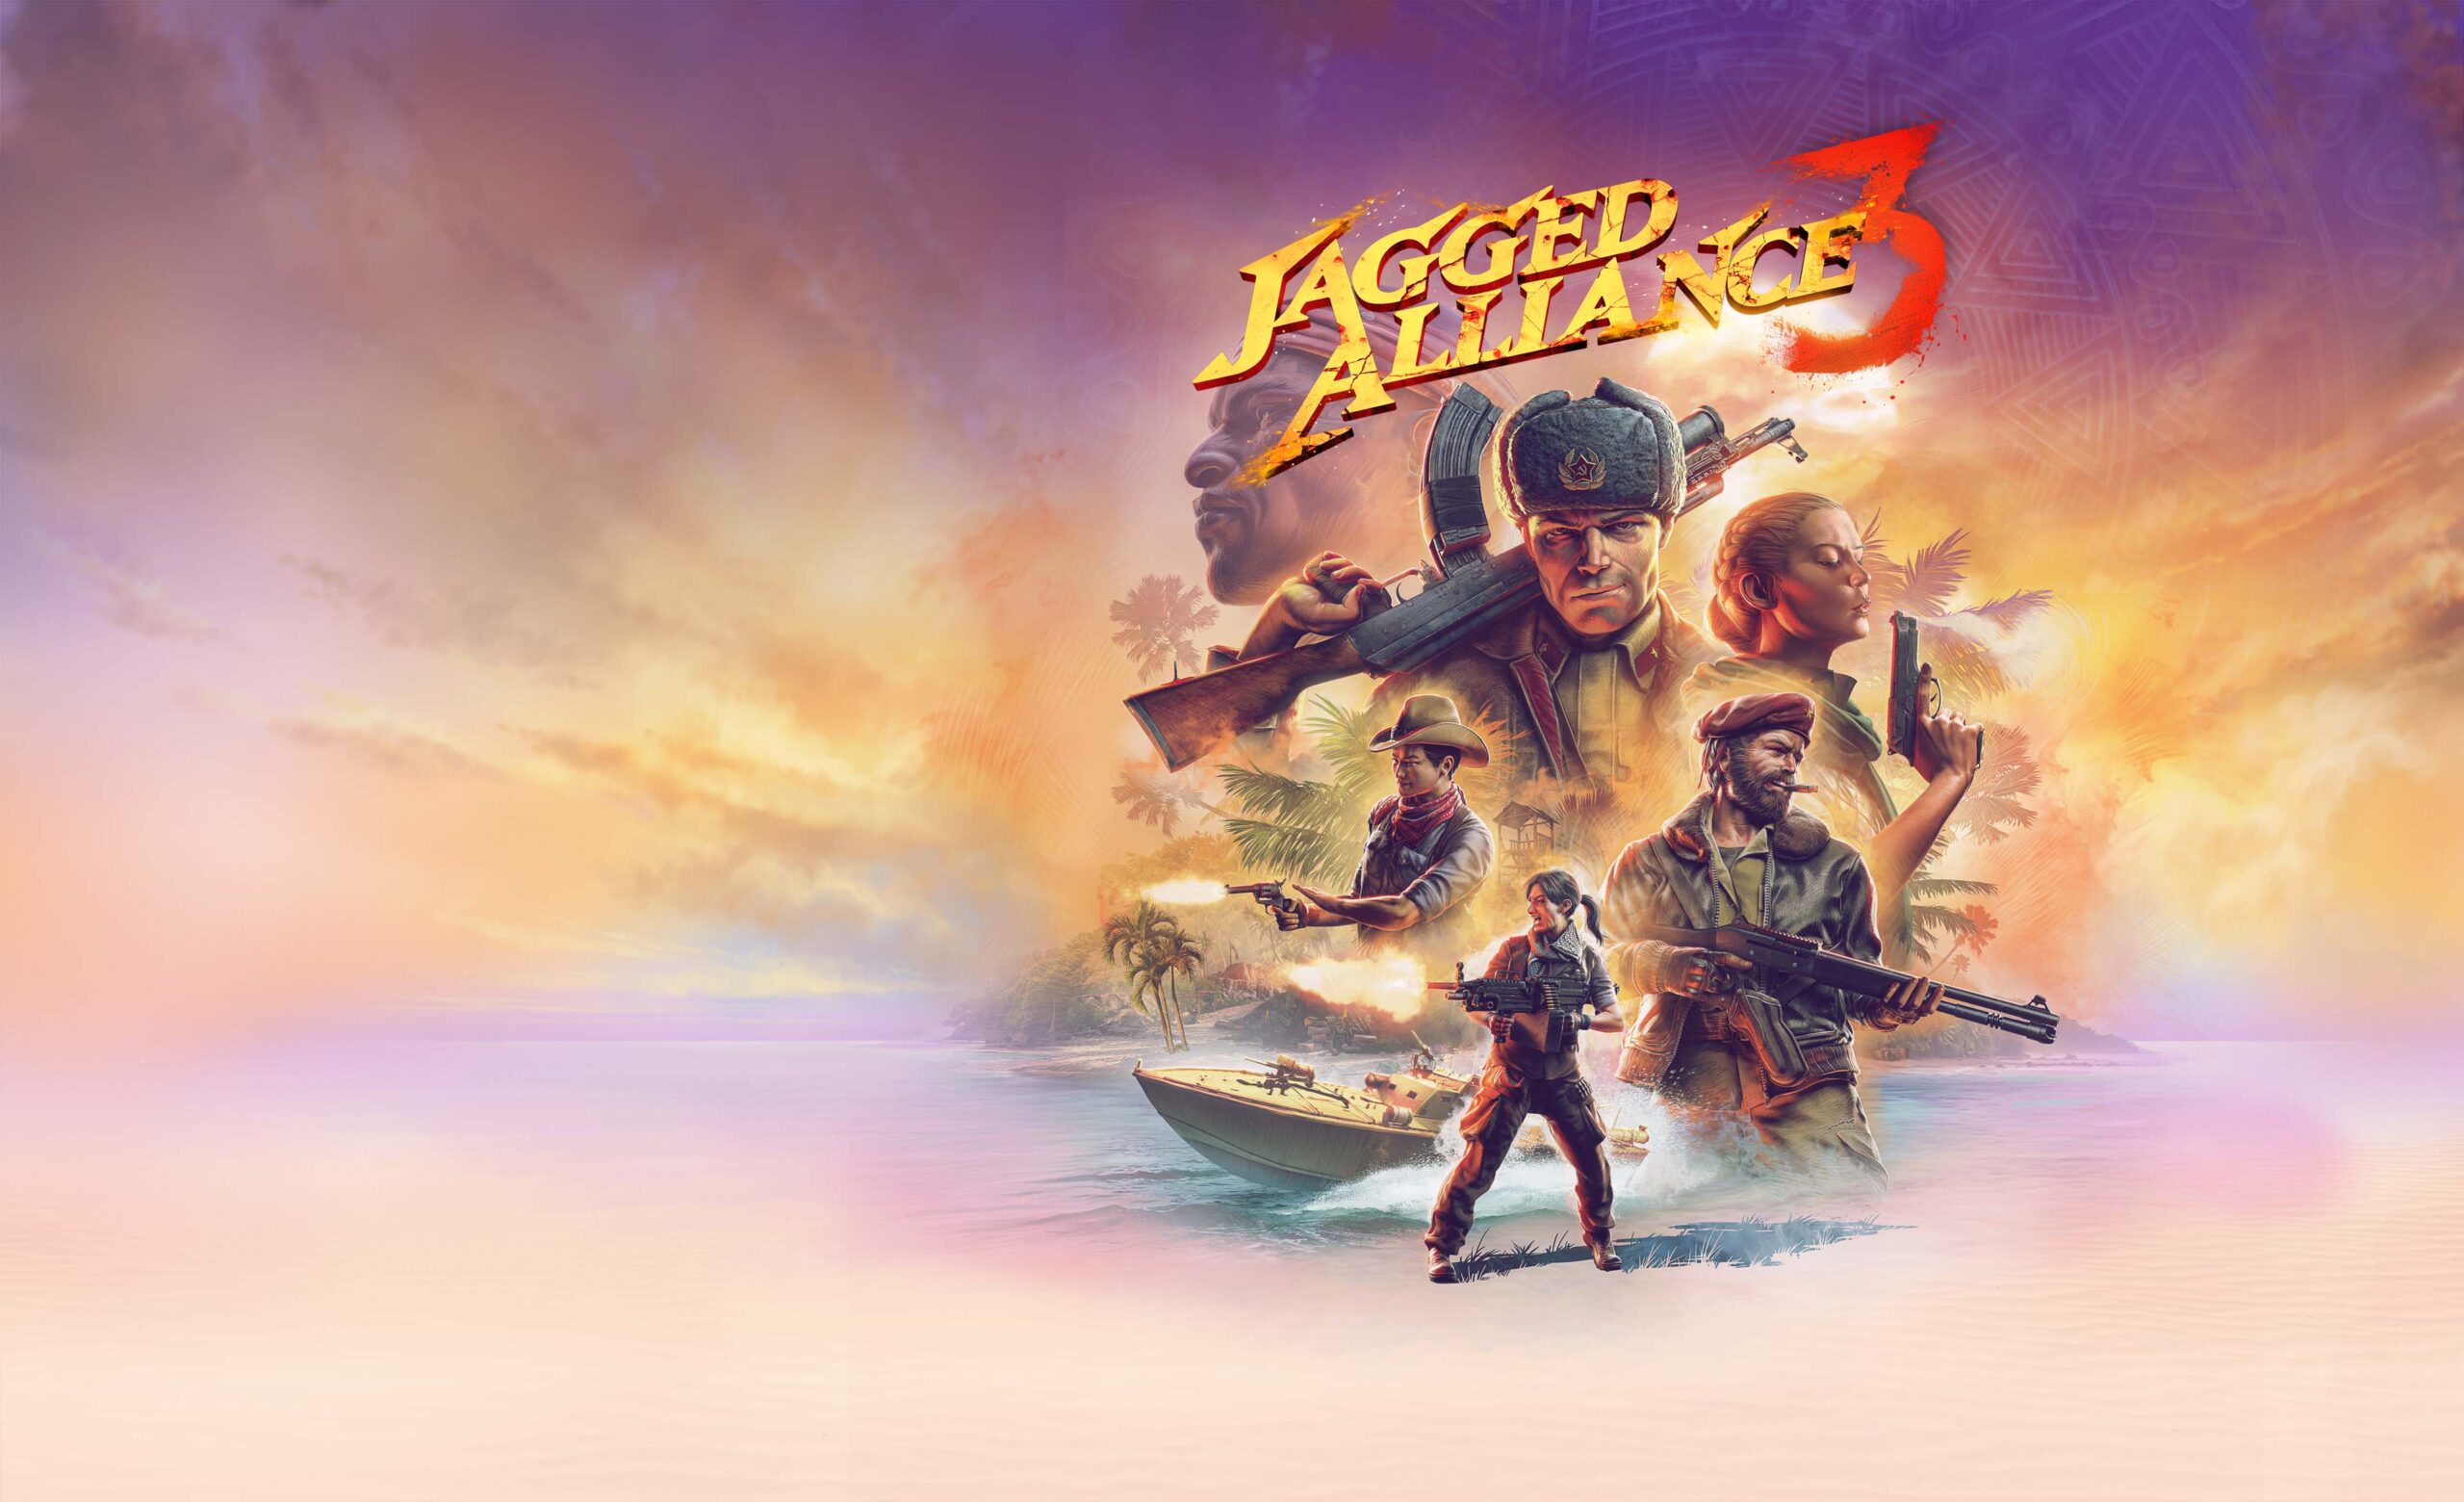 Jagged Alliance 3 is a tactical strategy game with a 90s action vibe